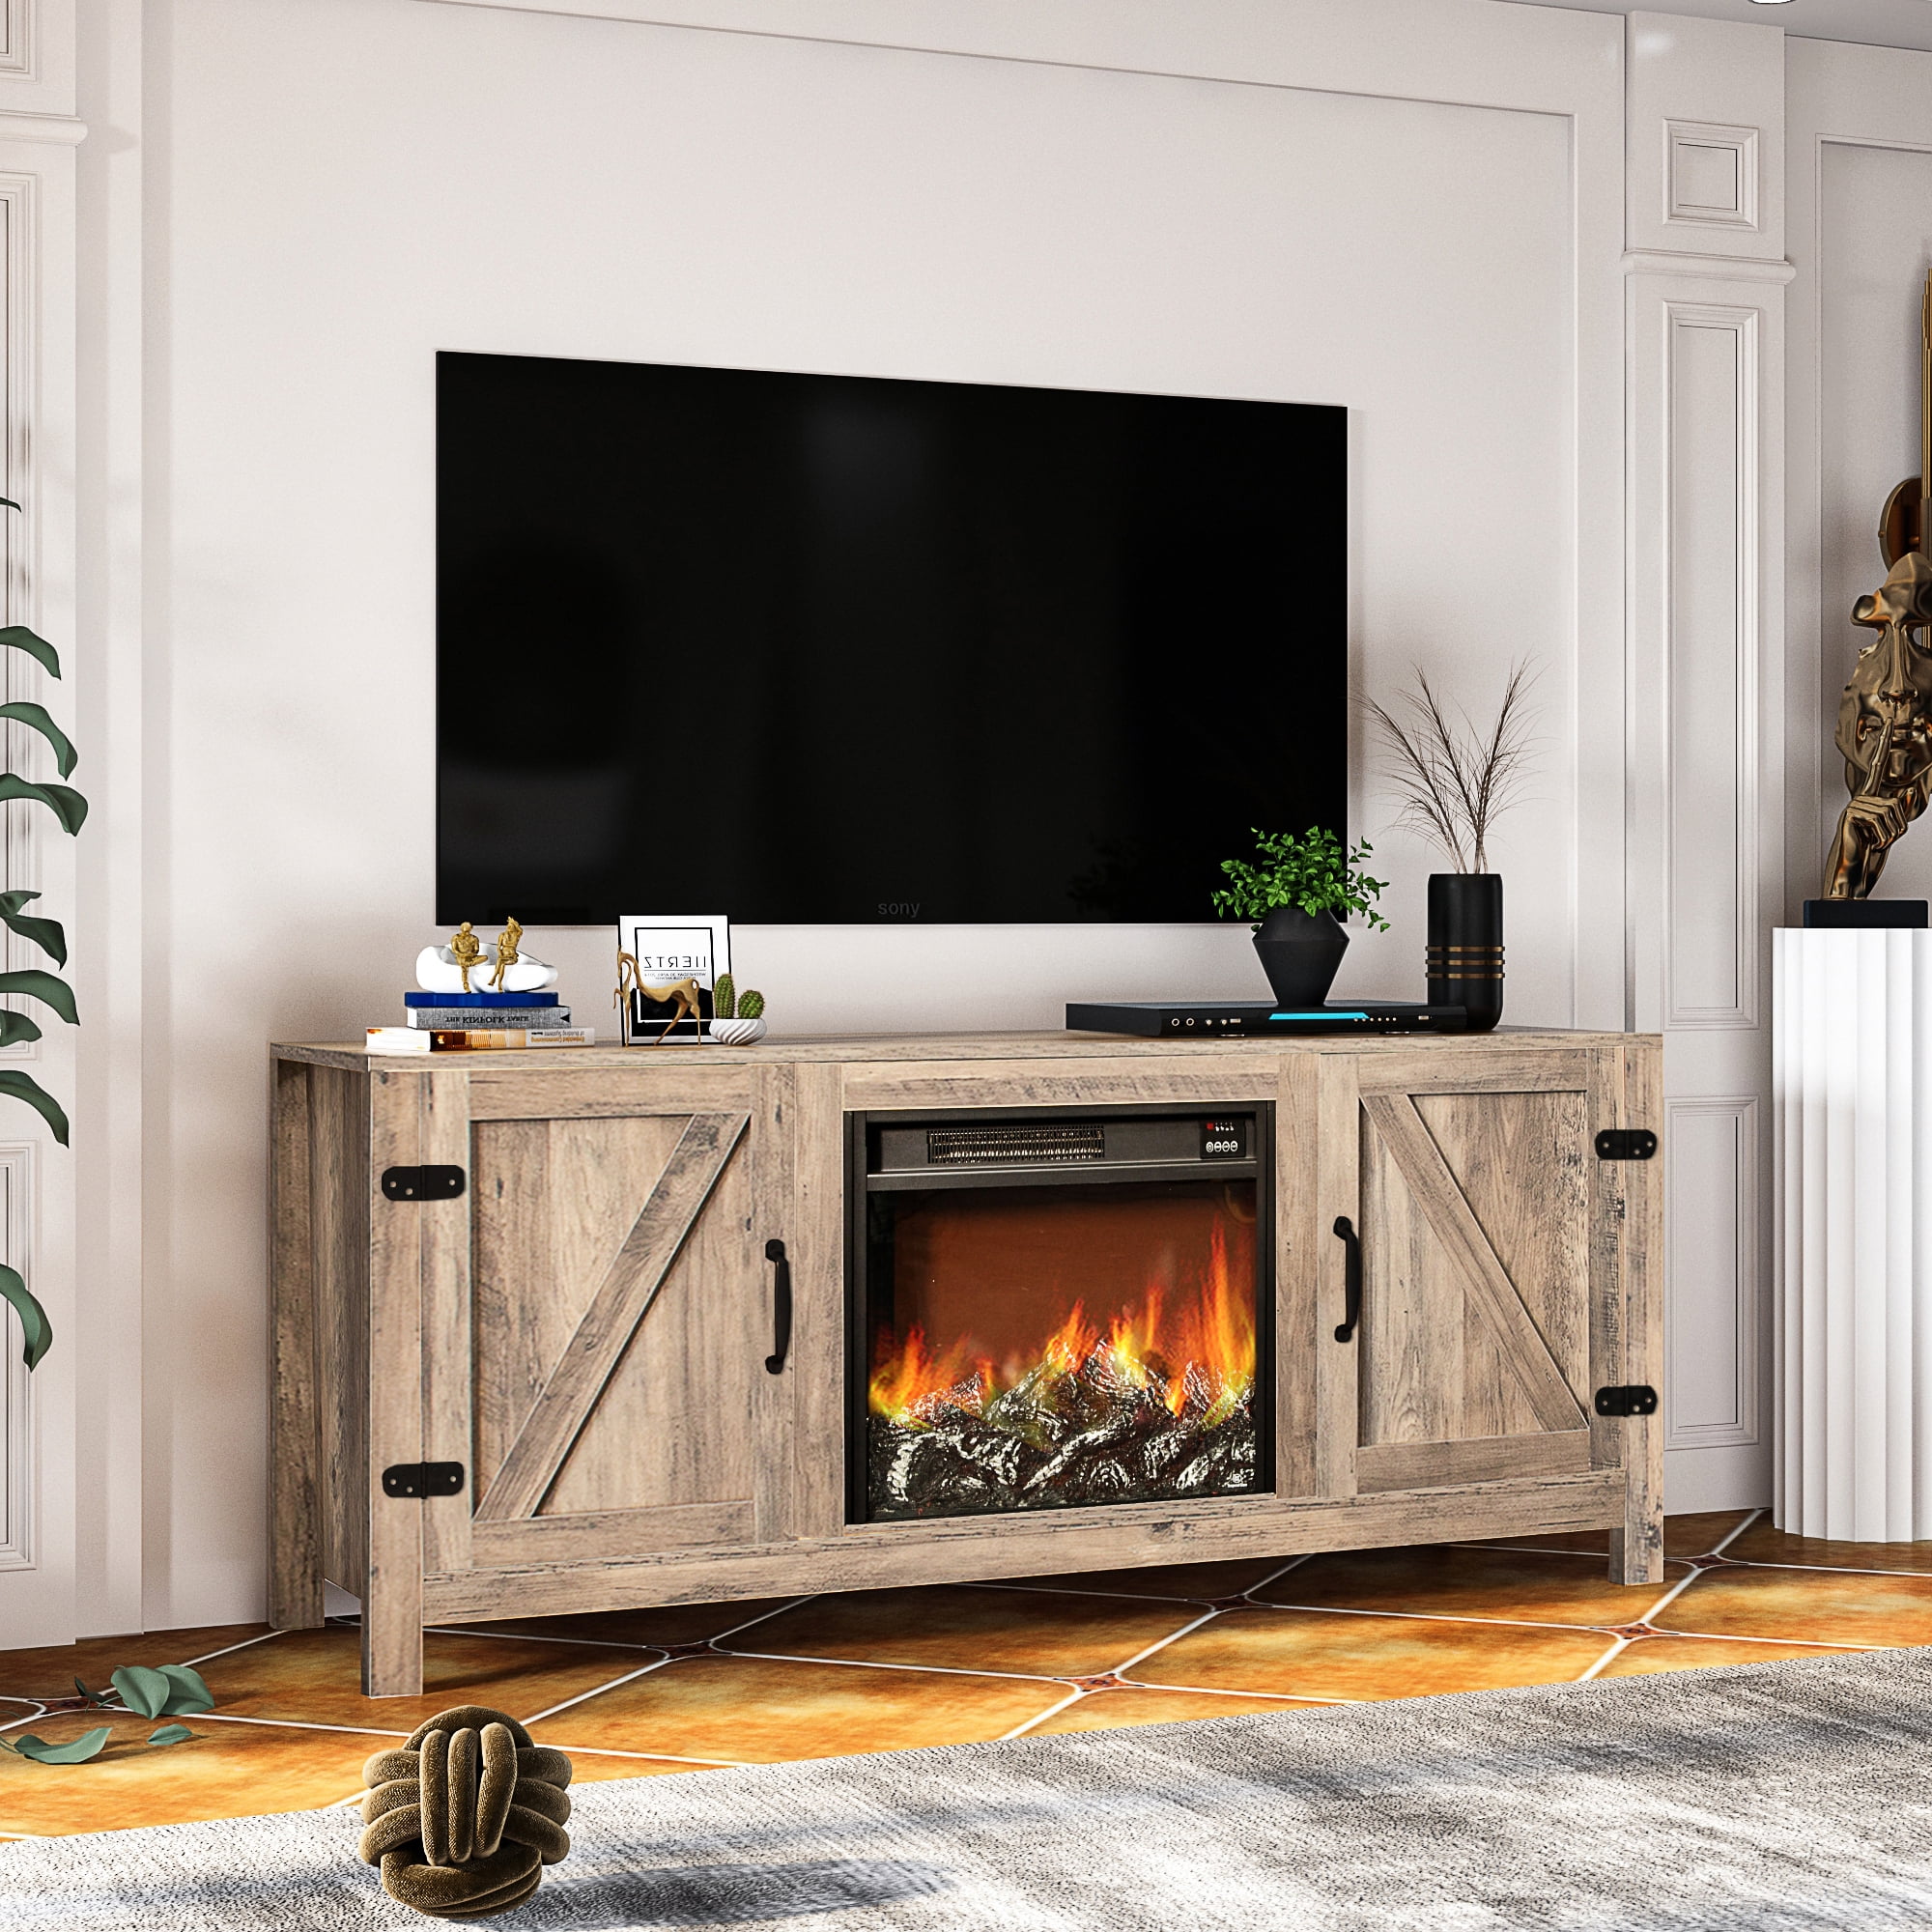 Fireplace TV Stand for TV up to 65 inches, Wood Electric Fireplace TV Console Table Stand with Storage, Home Living Room Entertainment Center Media Console, Rustic Brown, 58"L x 16"W x 25"H